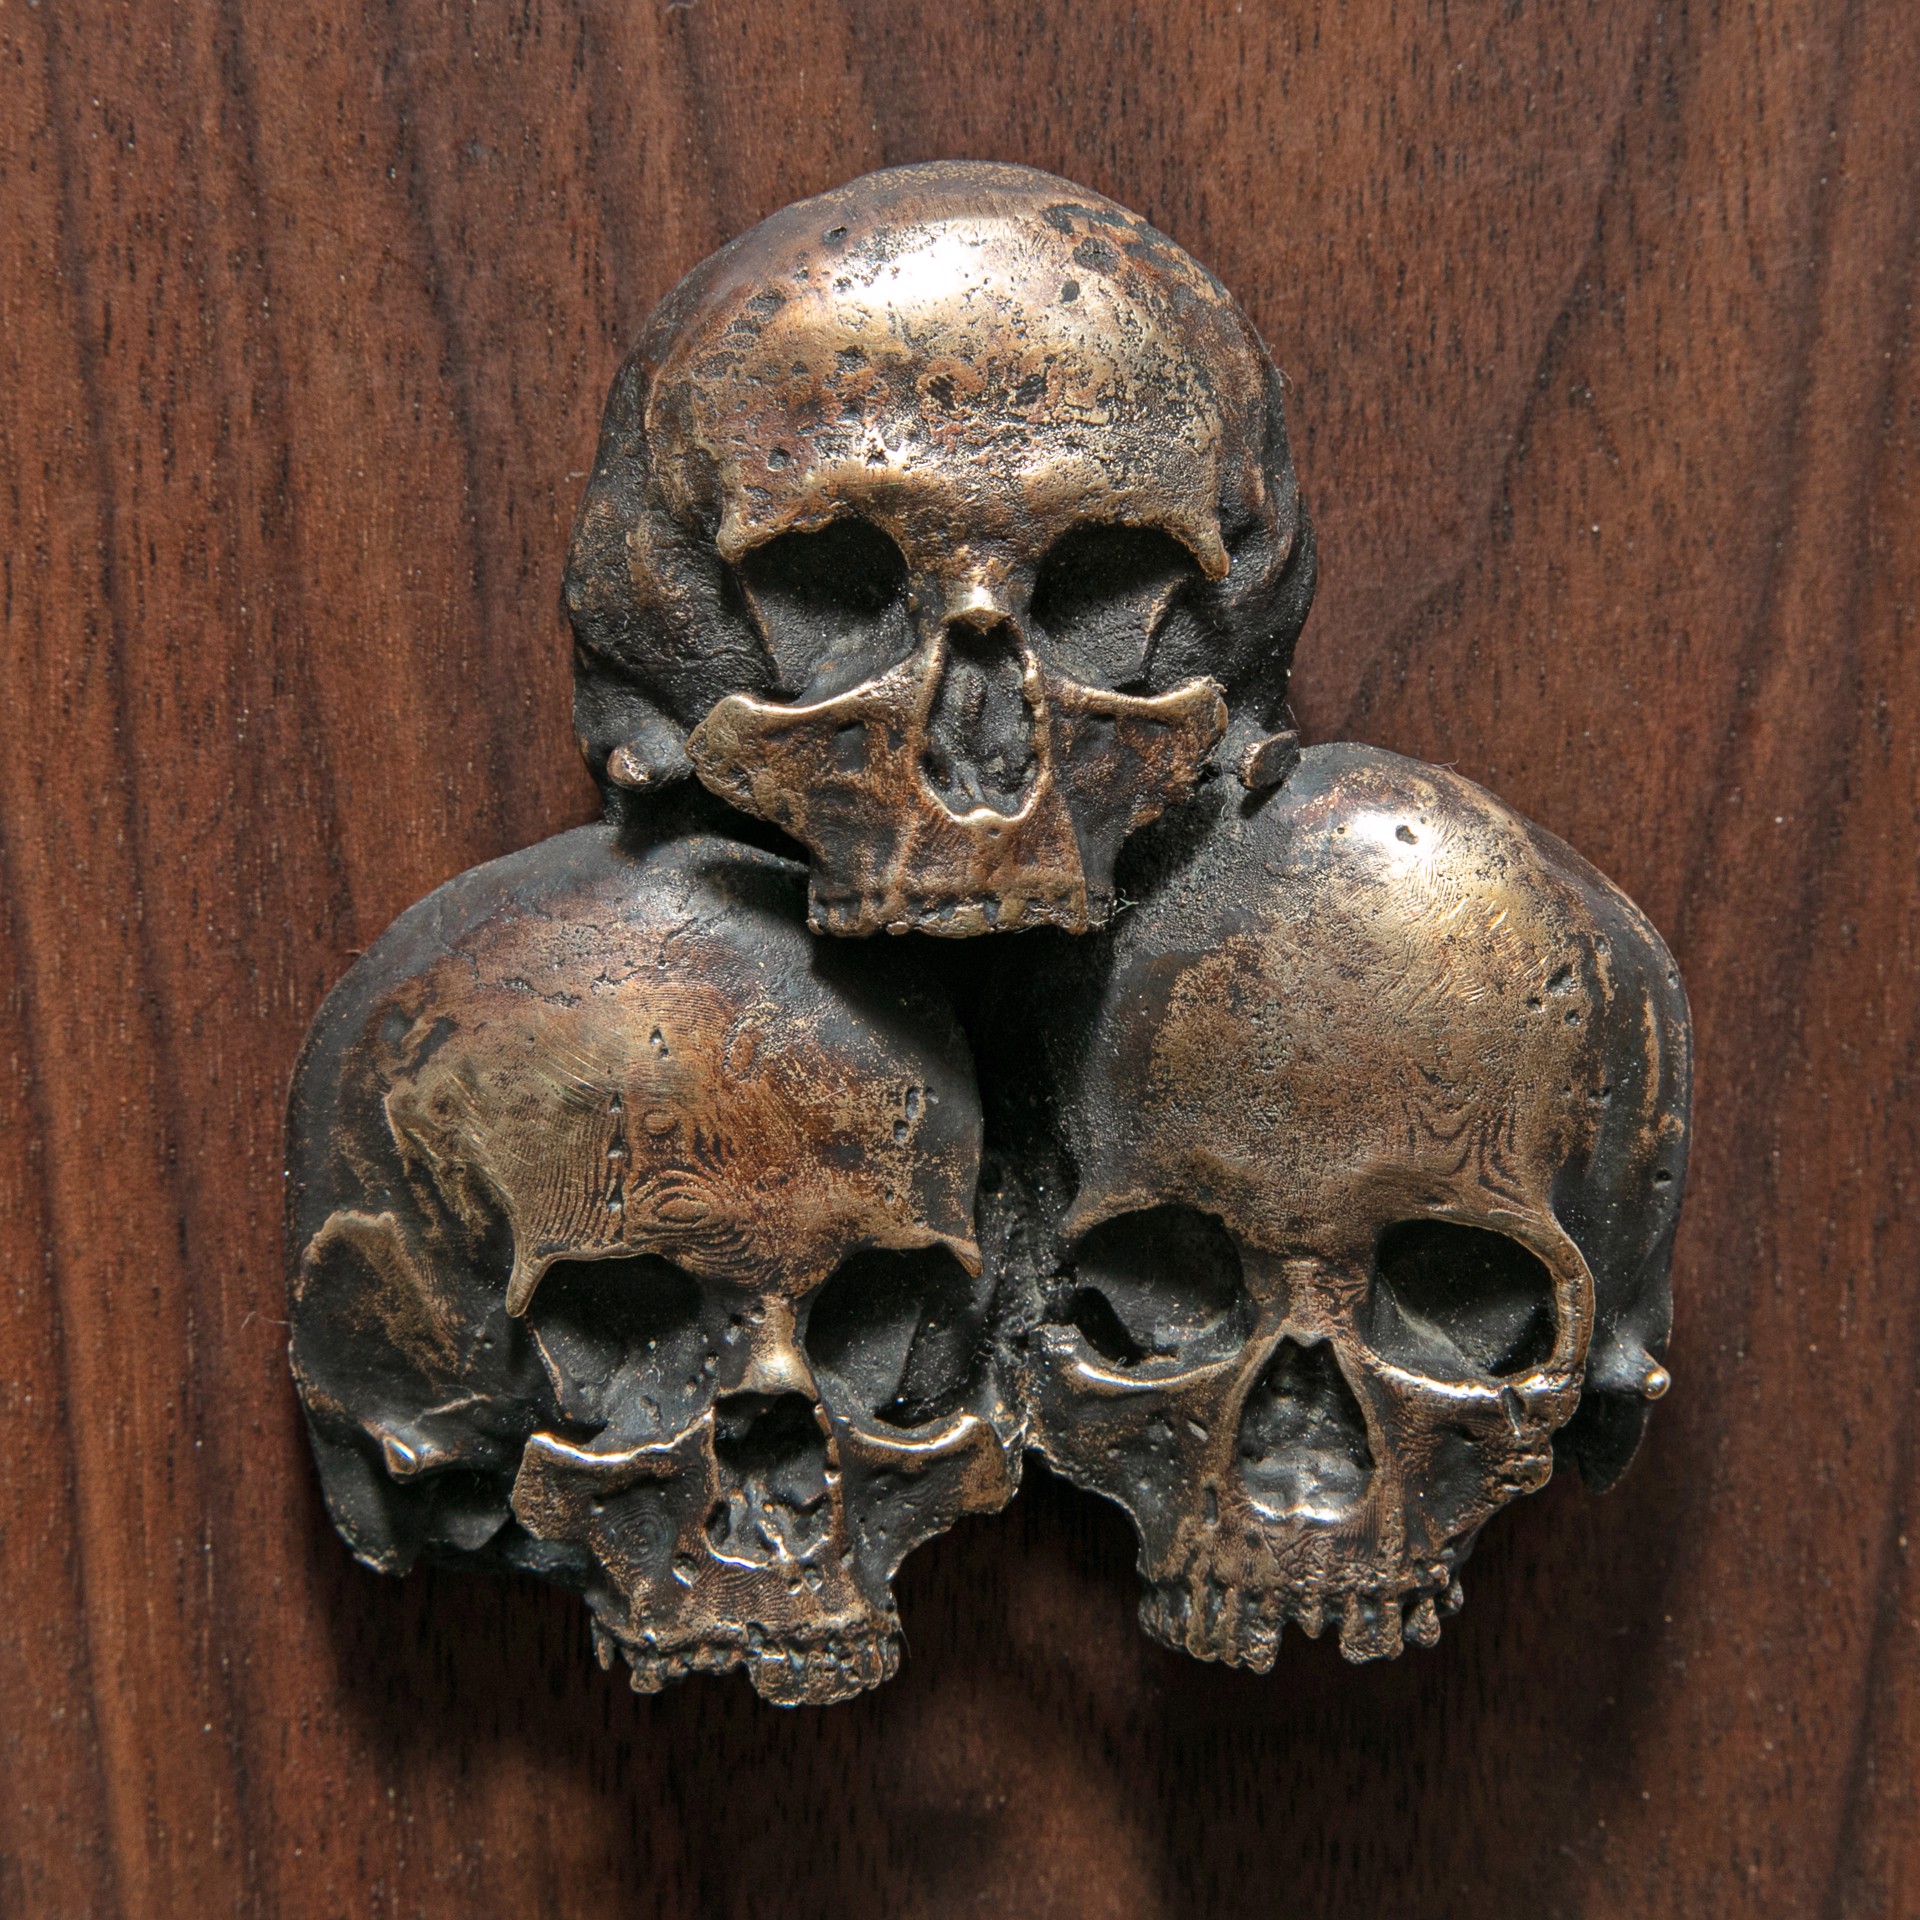 3 Skulls by Dana Younger